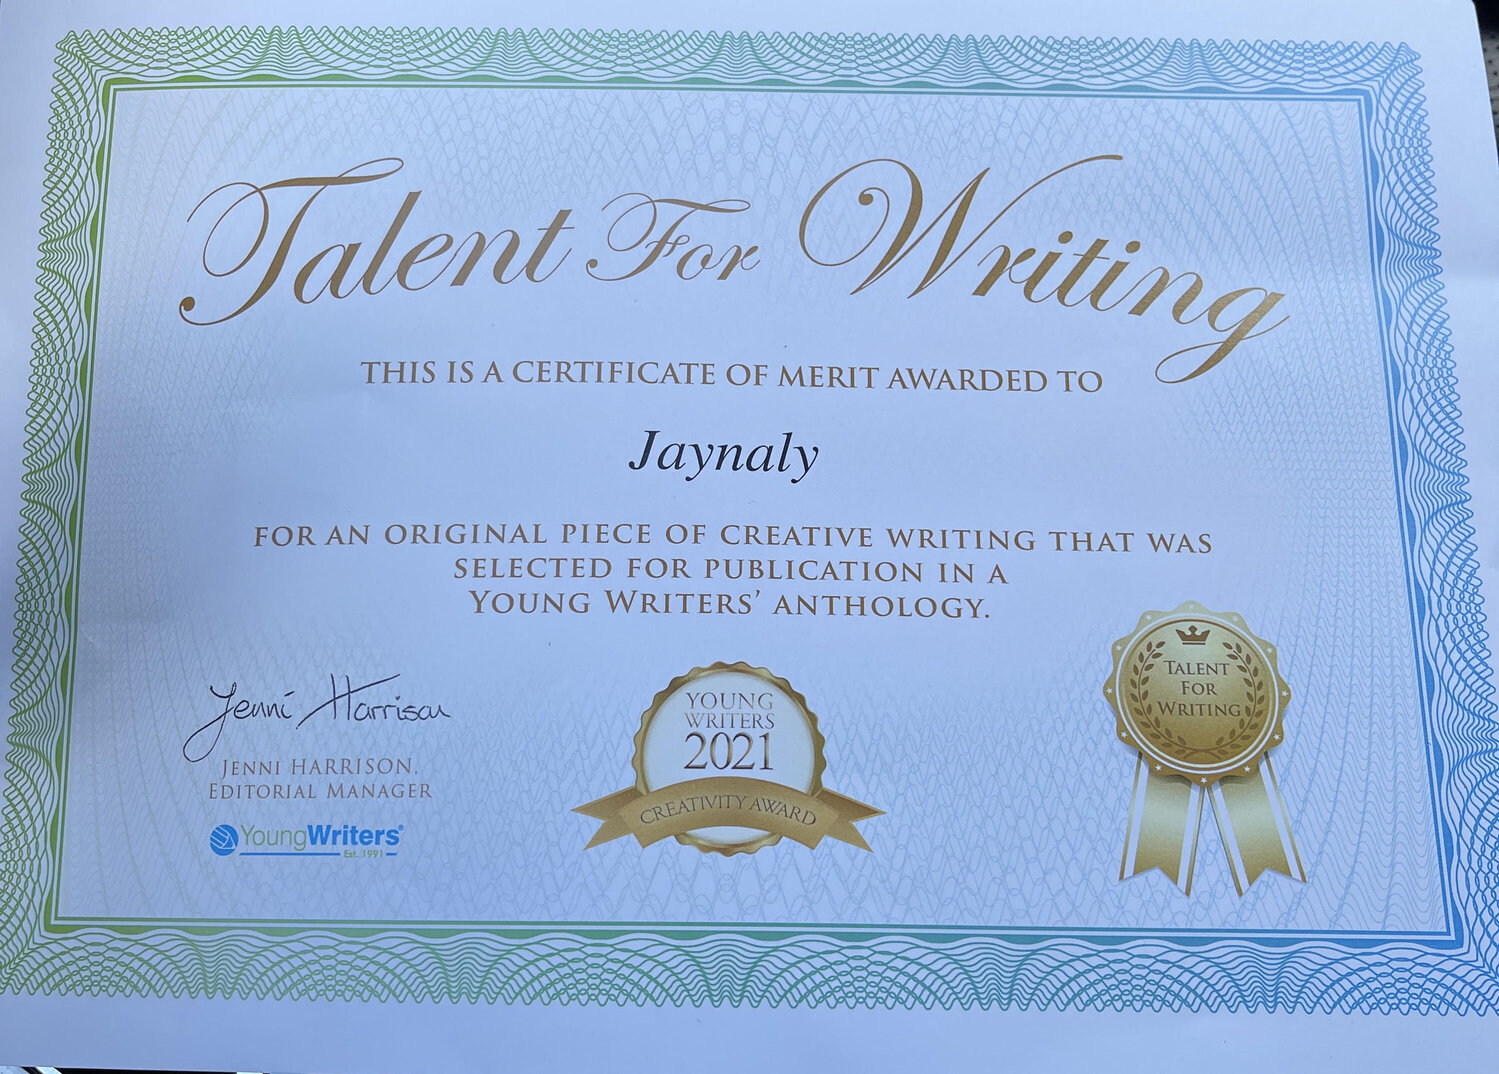 rsz_talent-for-writing-jaynlay-winner